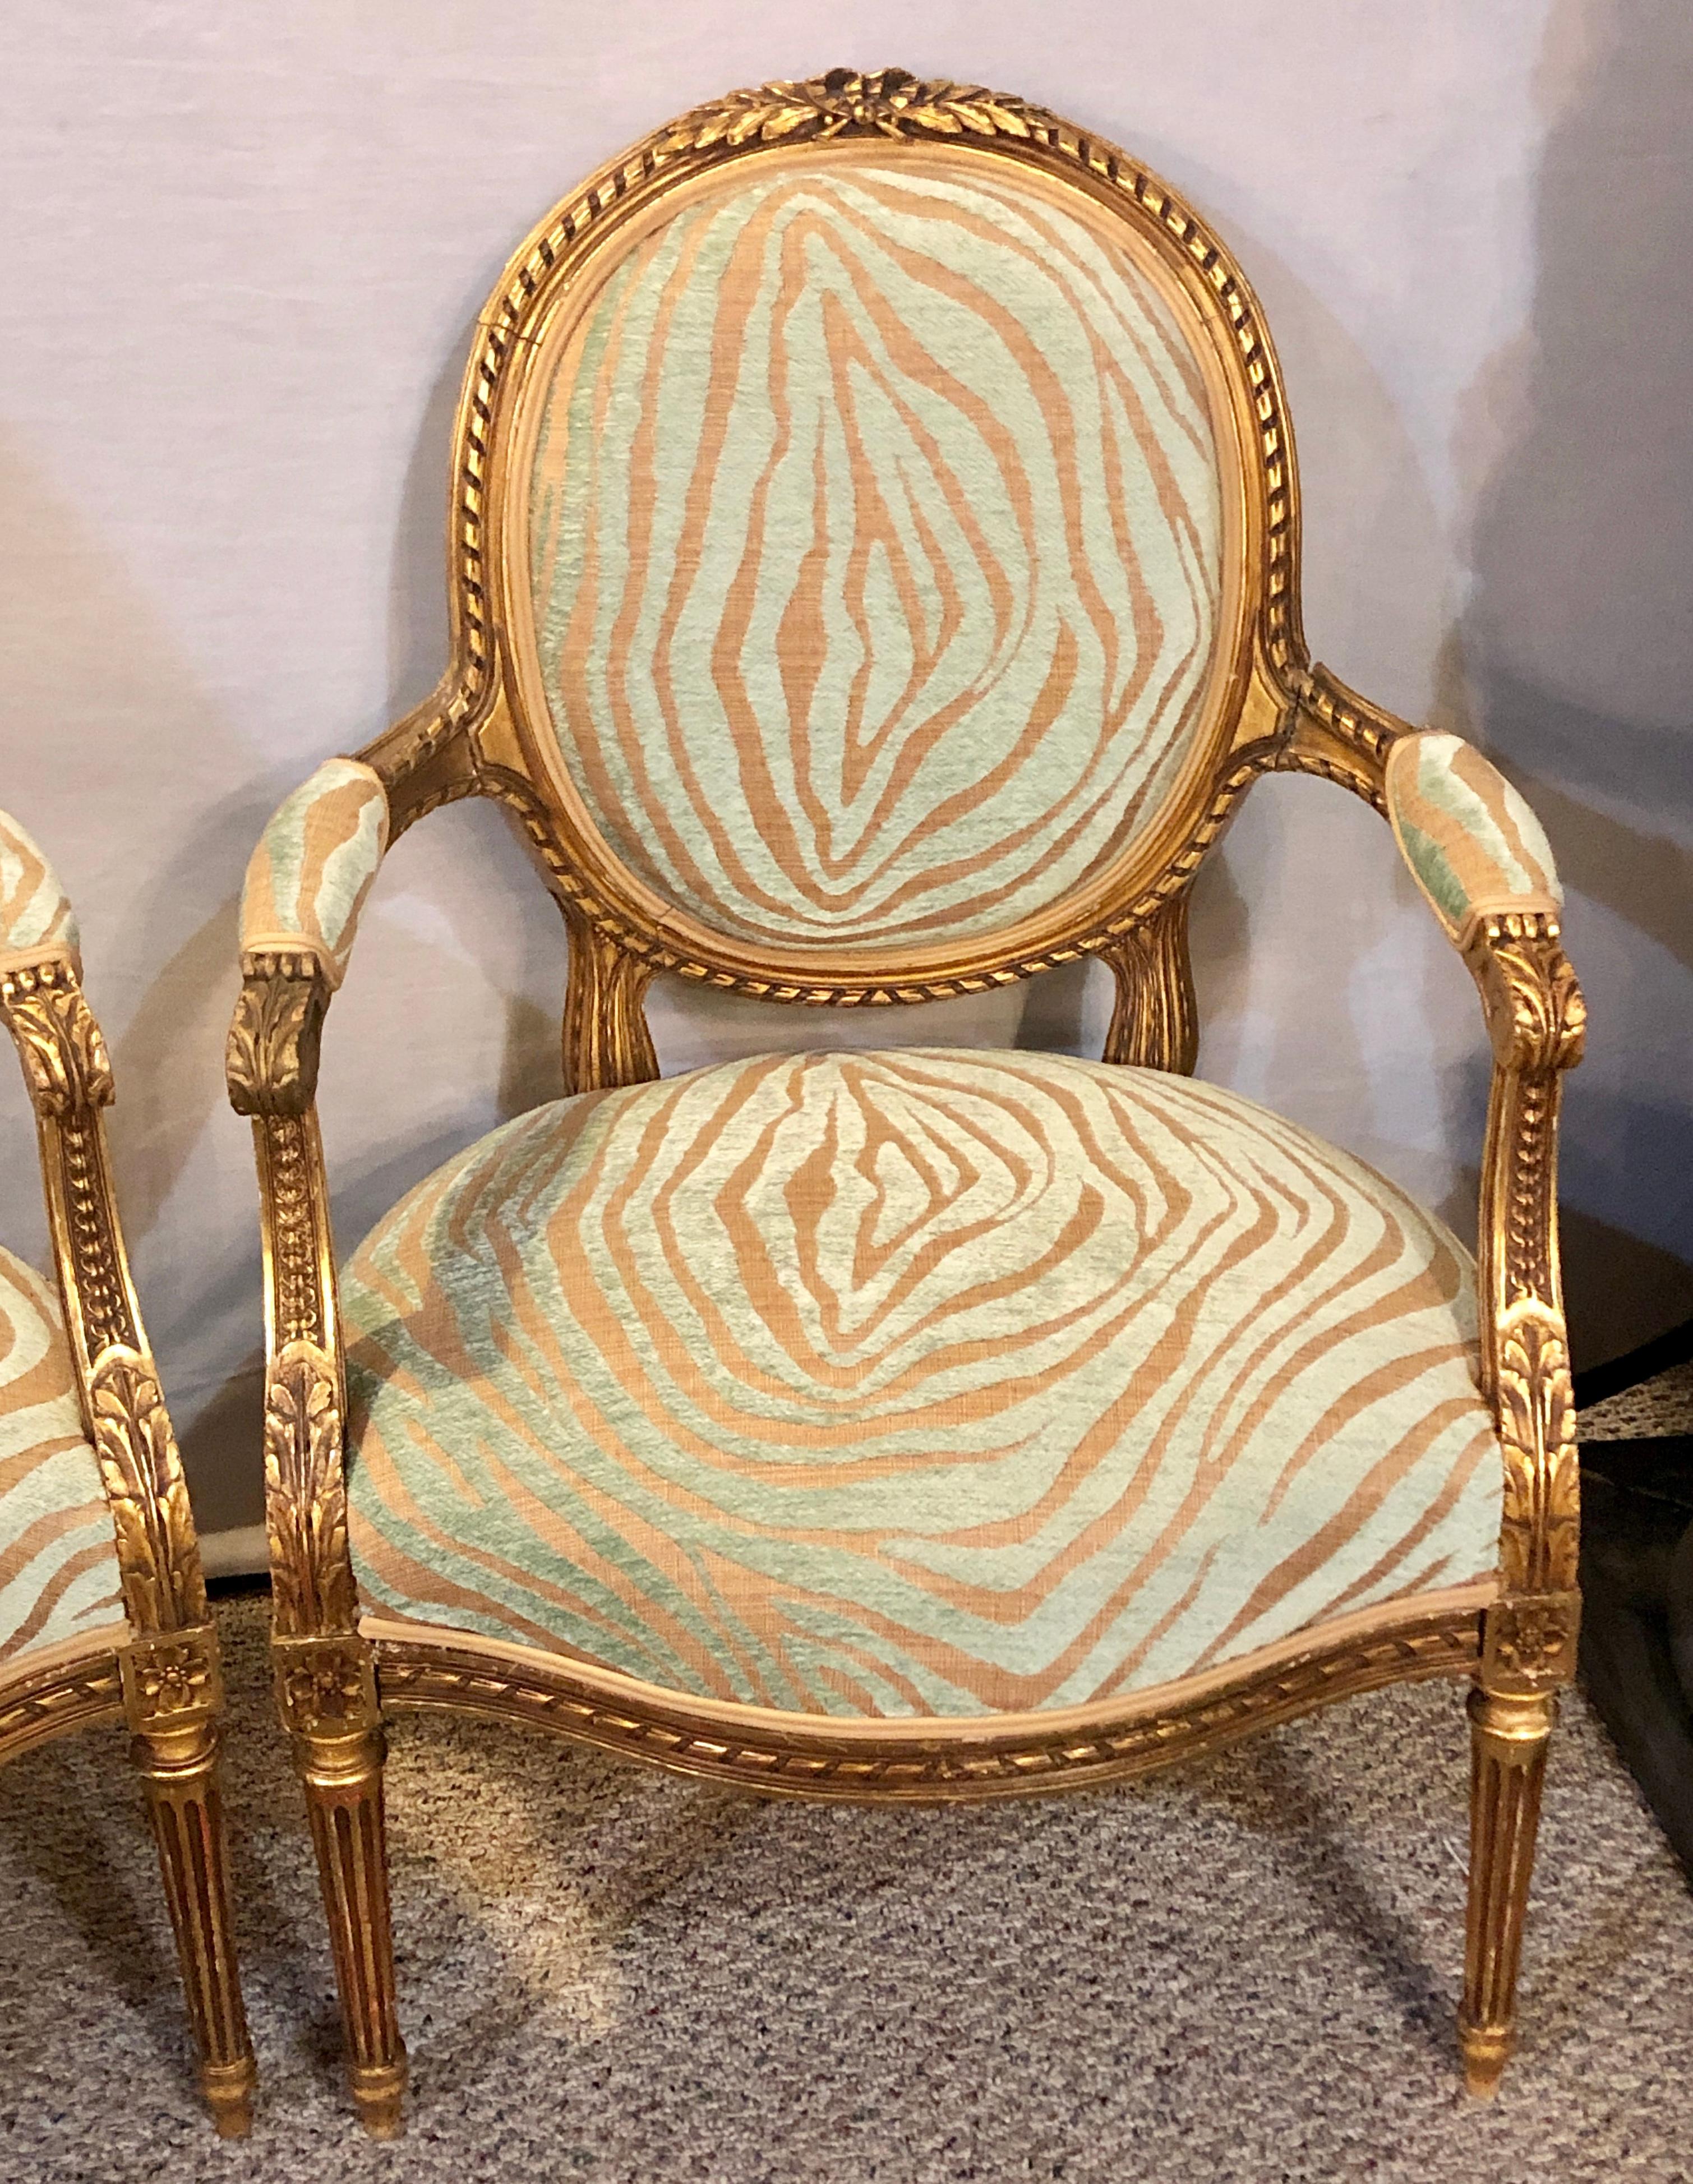 Faux Fur Pair of Louis XVI Style Green Zebra Striped Fauteuils or Armchairs